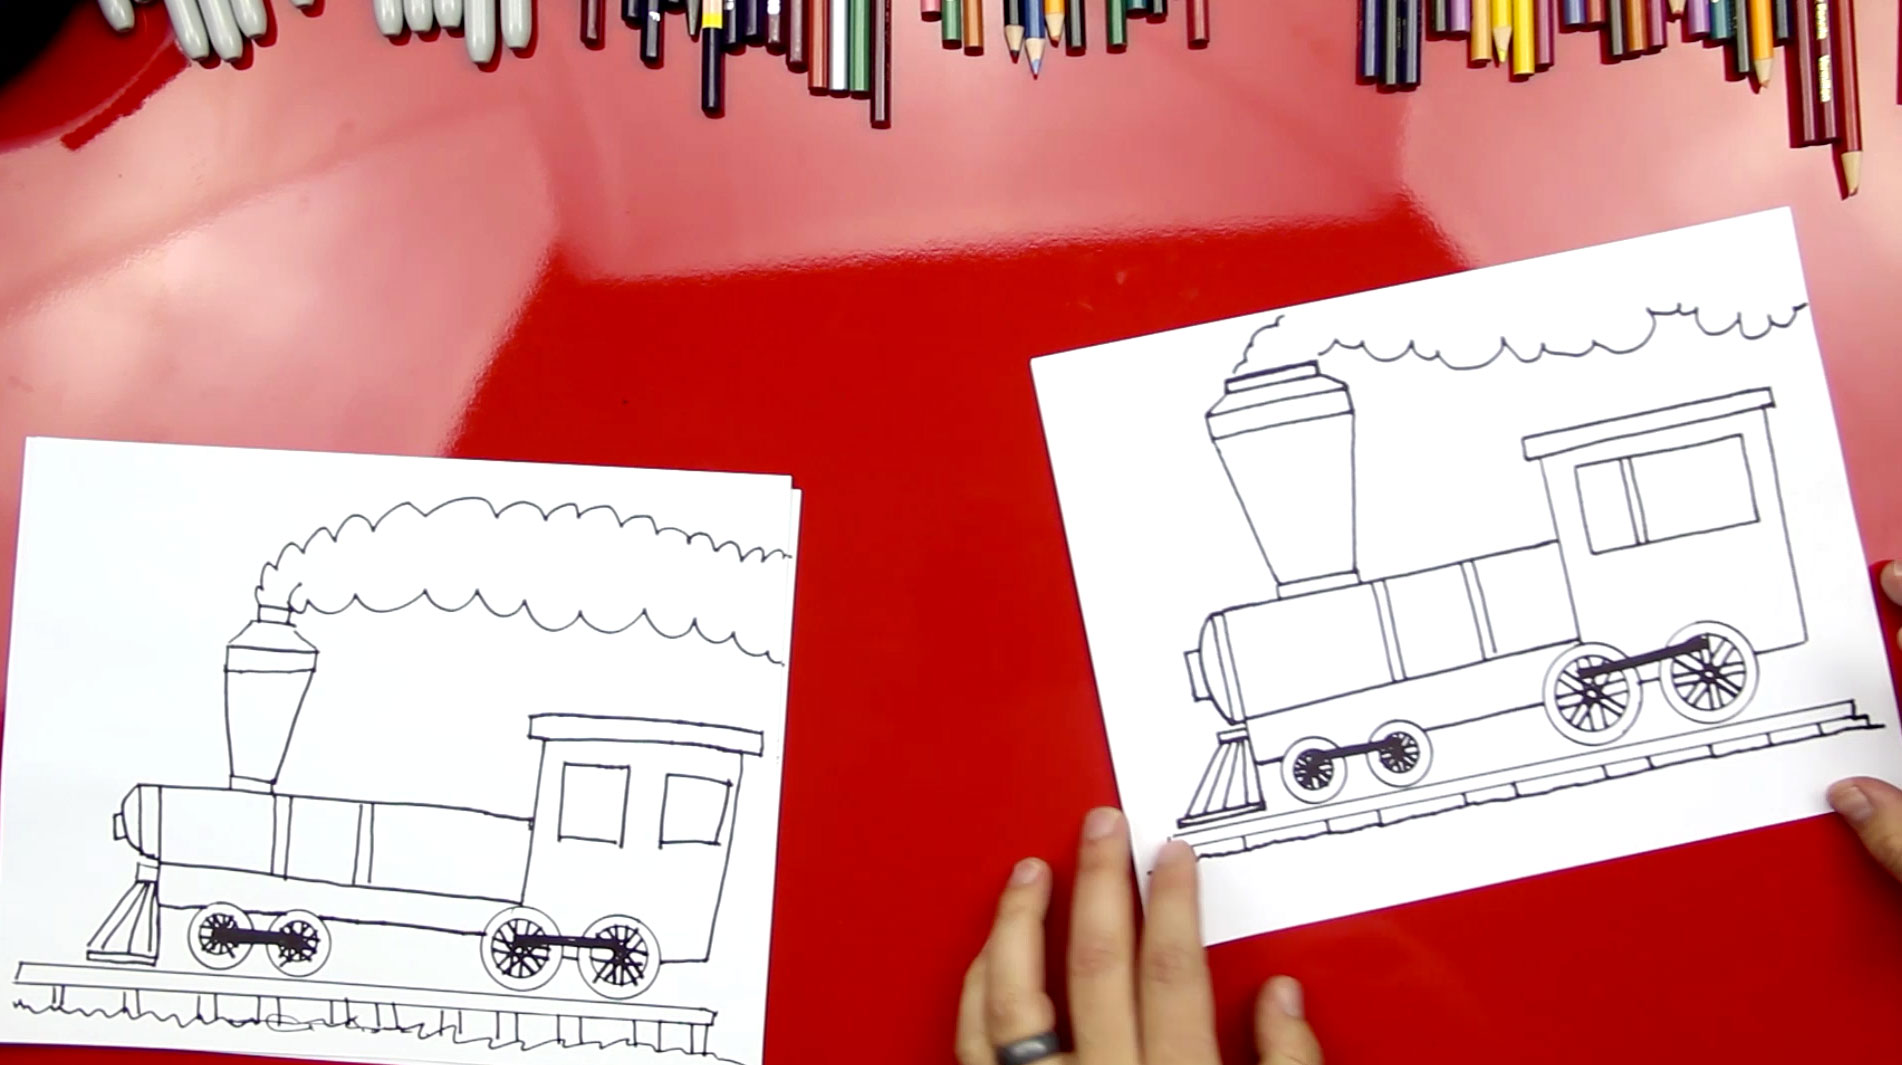 How To Draw A Train - Art For Kids Hub